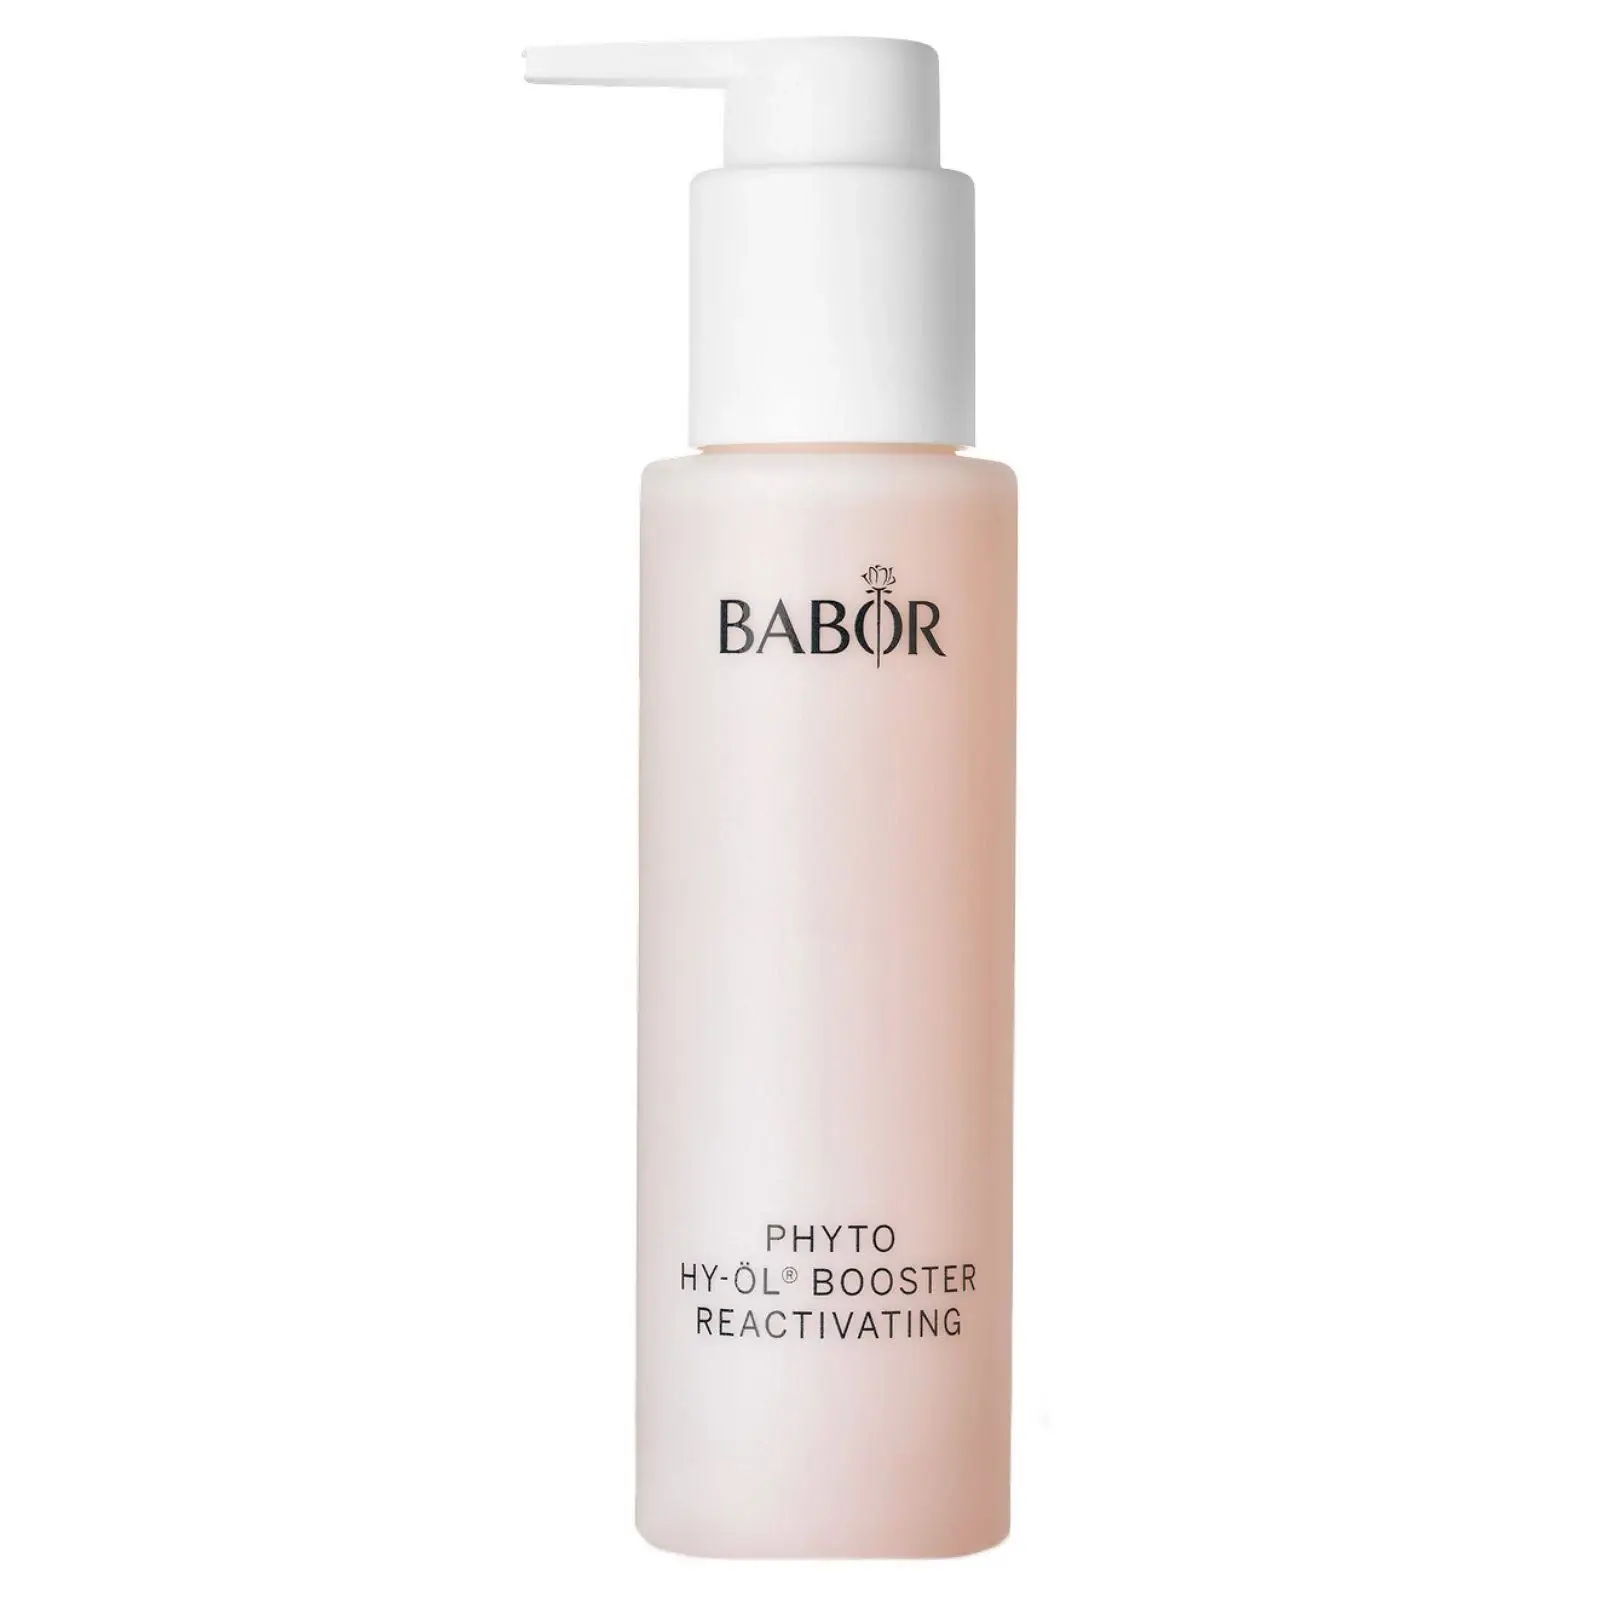 Babor Cleansing Phyto HY-ÖL Booster Reactivating (100 ml)